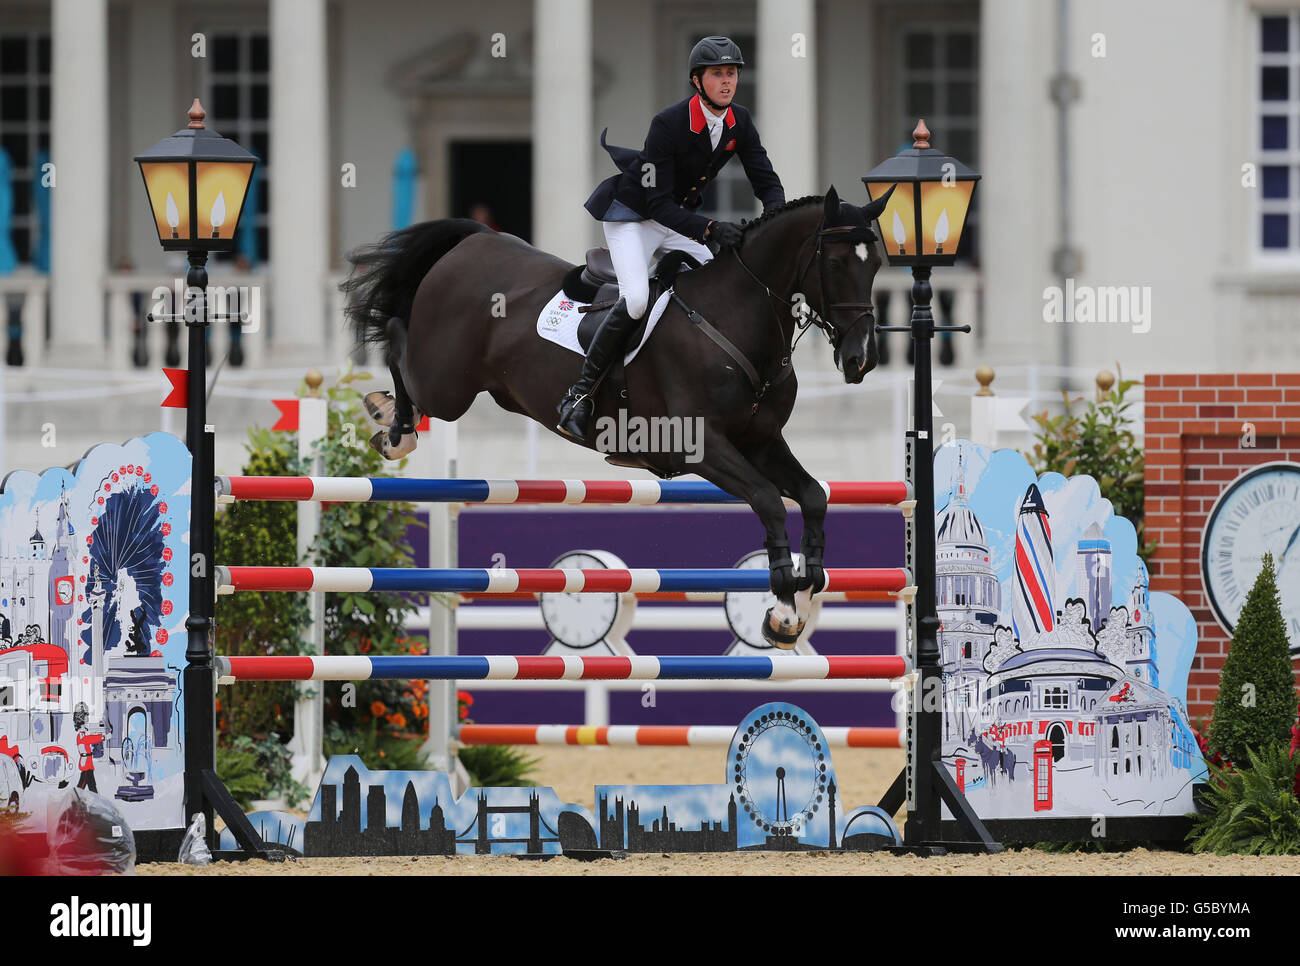 Great Britain's Ben Maher riding Triple X in the Equestrian Jumping ...